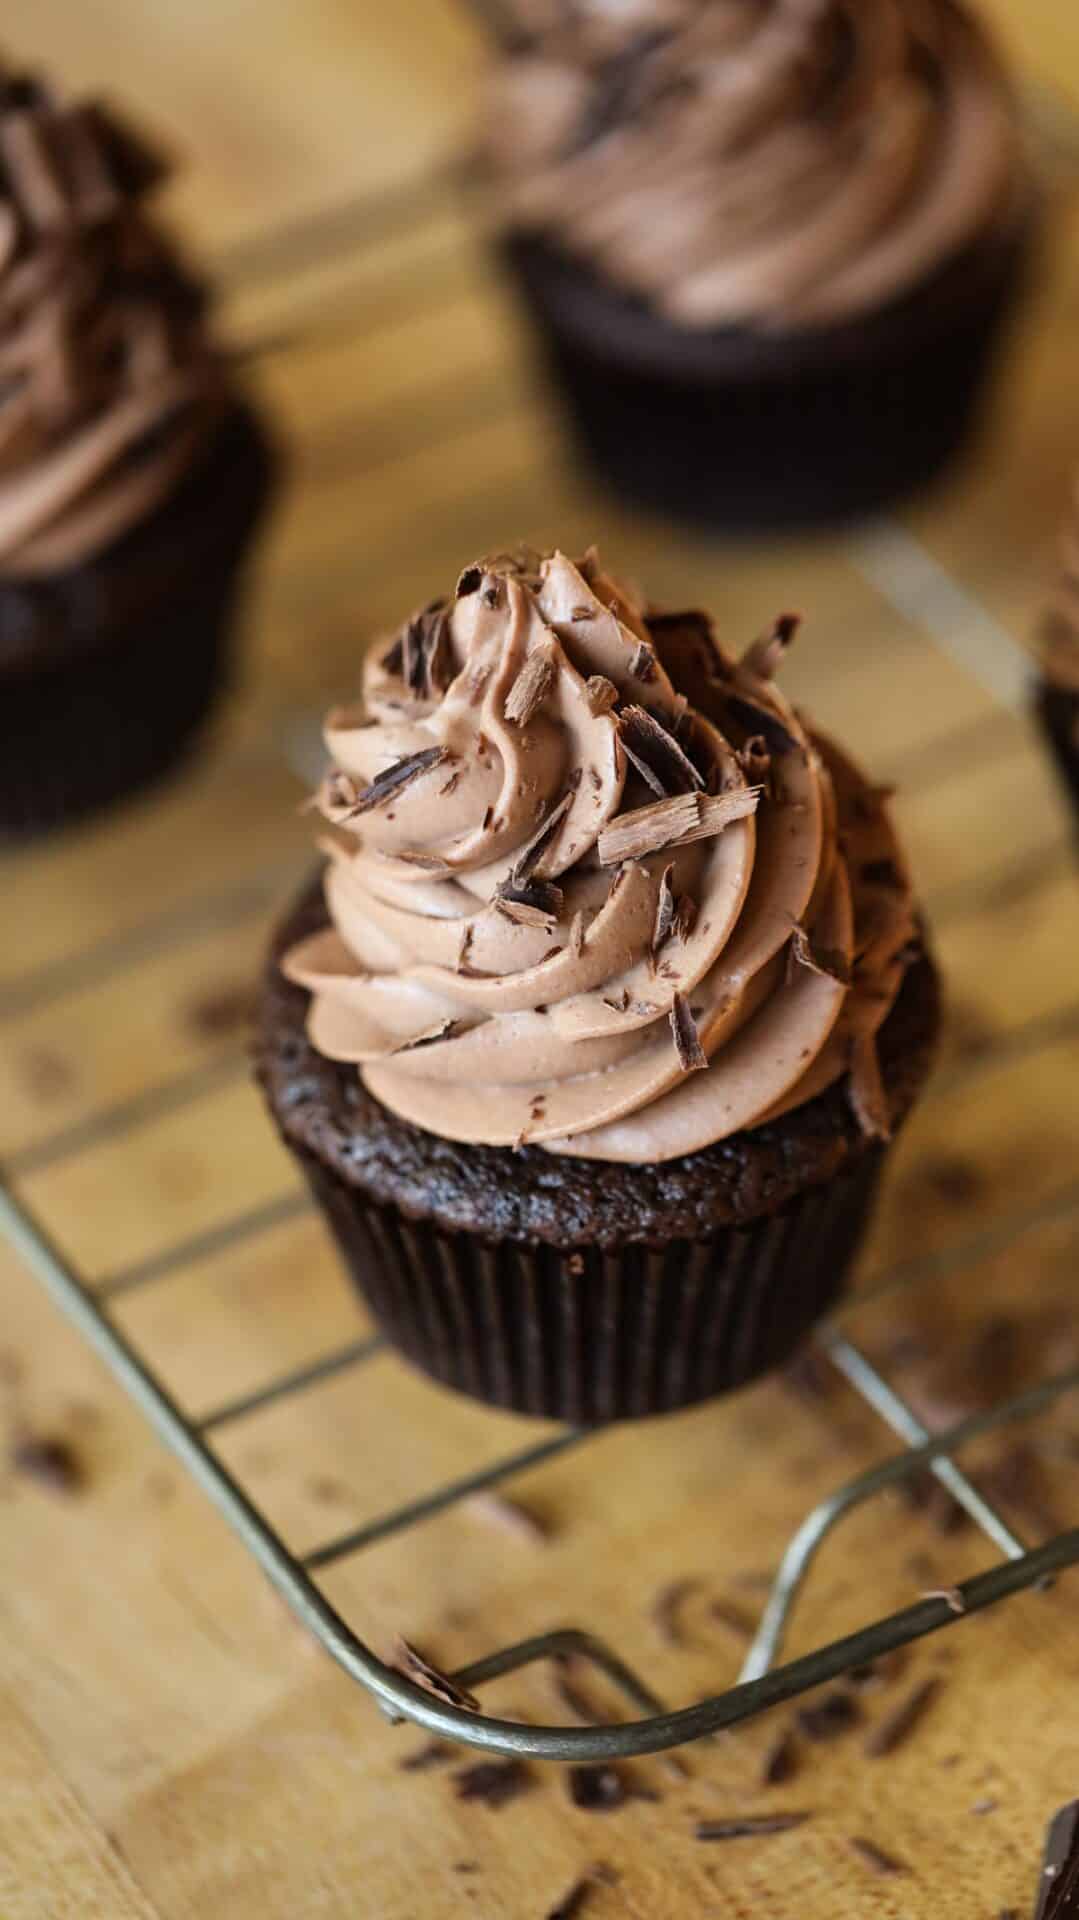 Chocolate Cupcakes with Chocolate Cream Cheese frosting garnished with chocolate curls